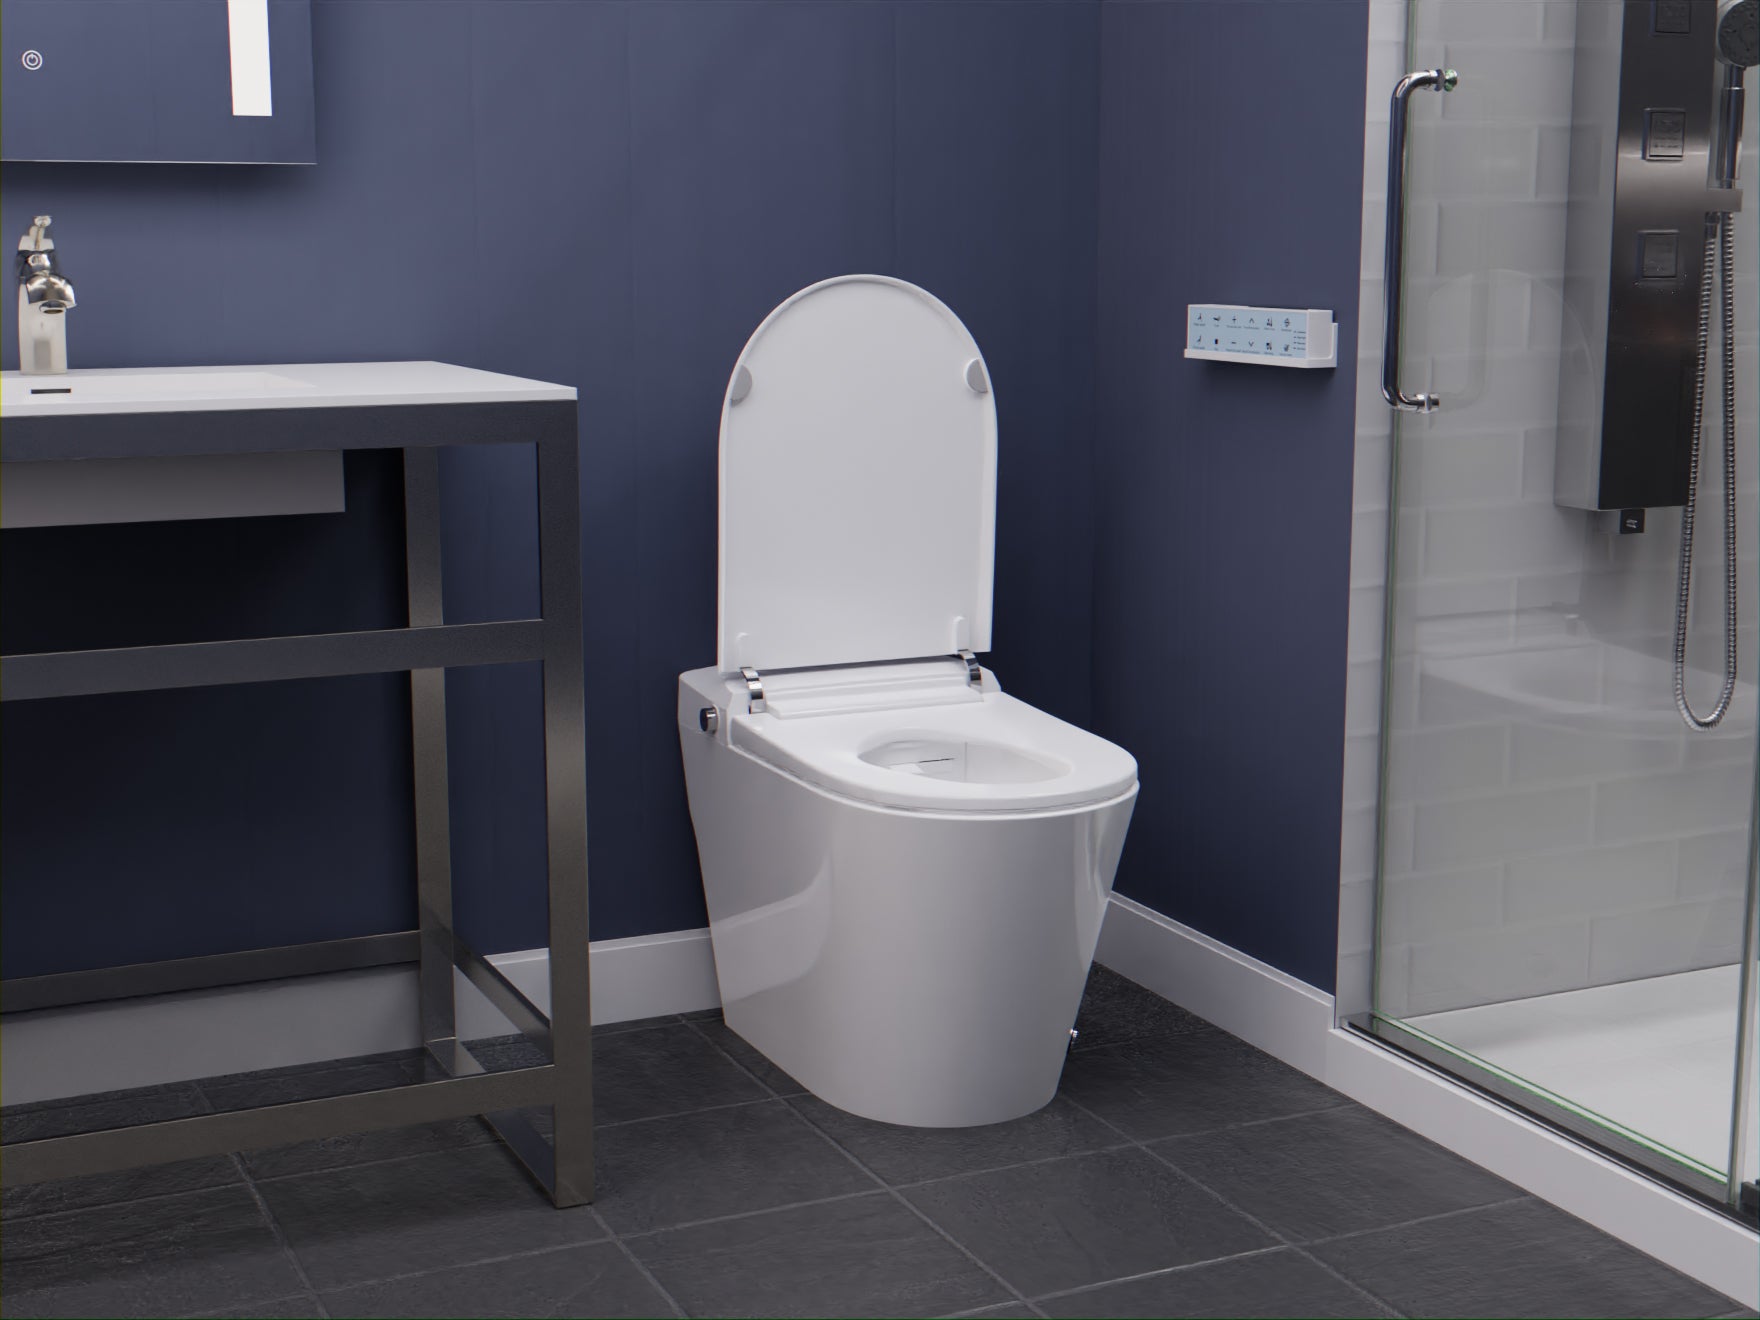 TL-ST950WIFI-WH - ENVO Echo Elongated Smart Toilet Bidet in White with Auto Open, Auto Flush, Voice and Wifi Controls